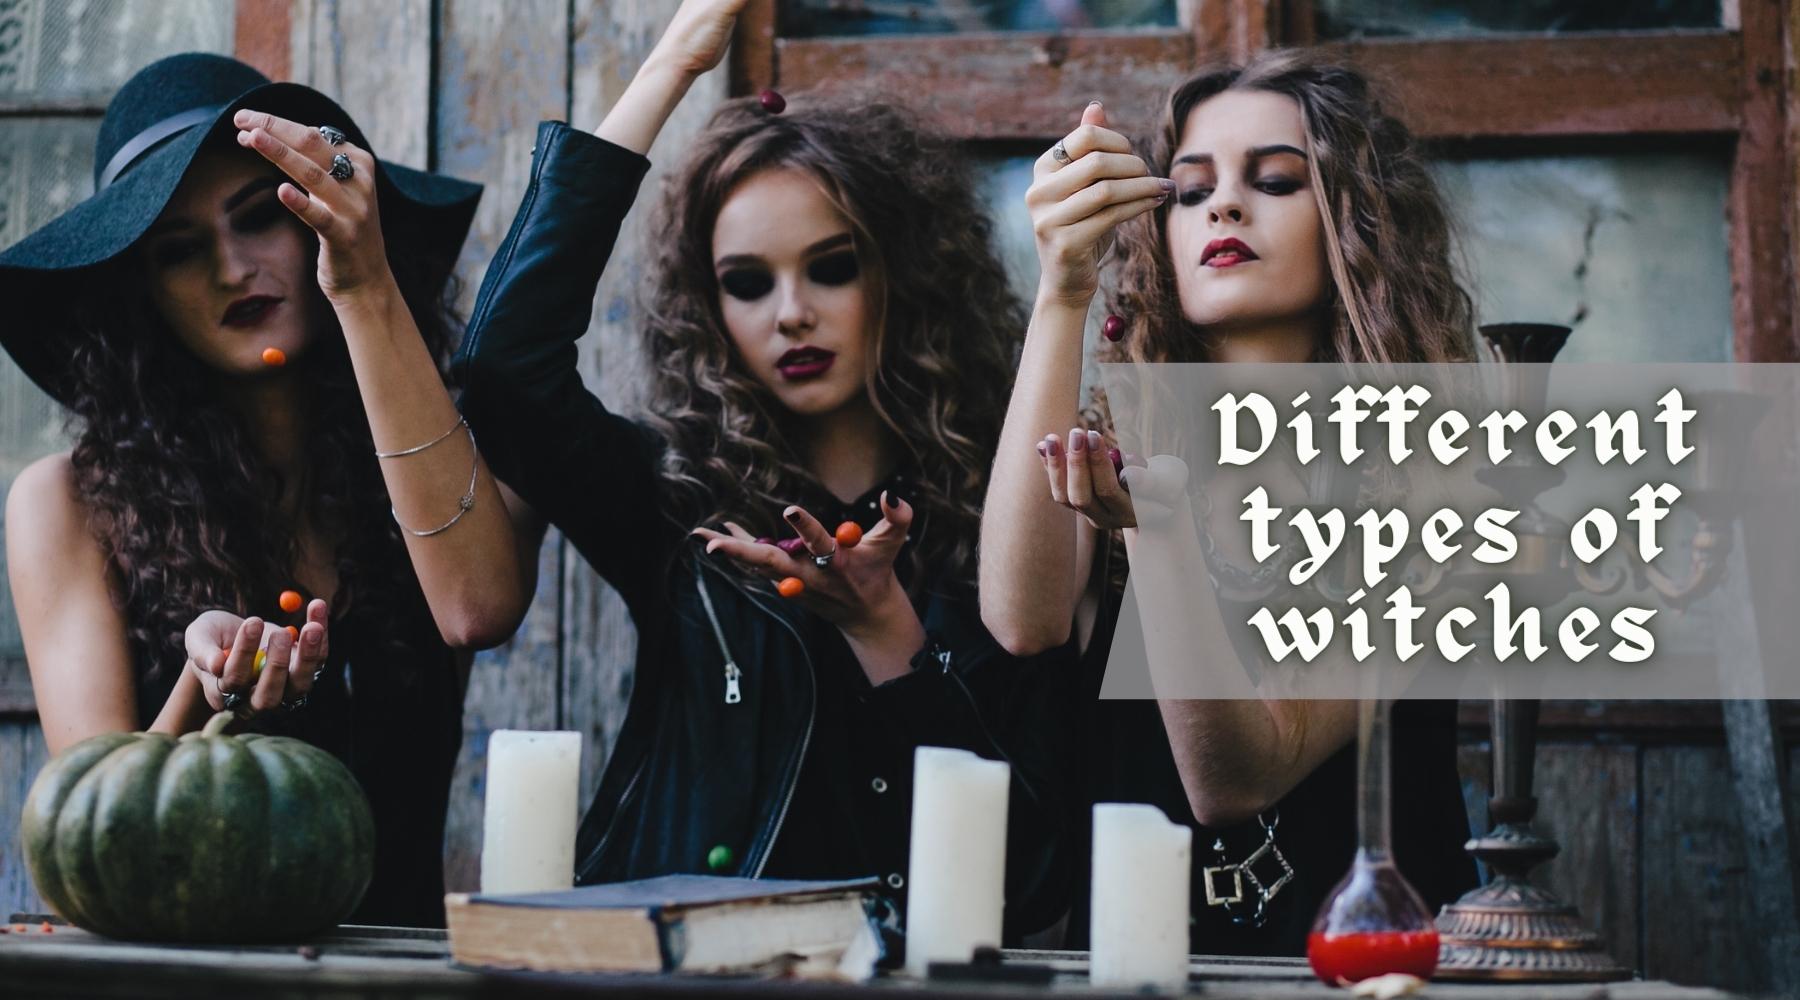 What are the Different Types of Witches?